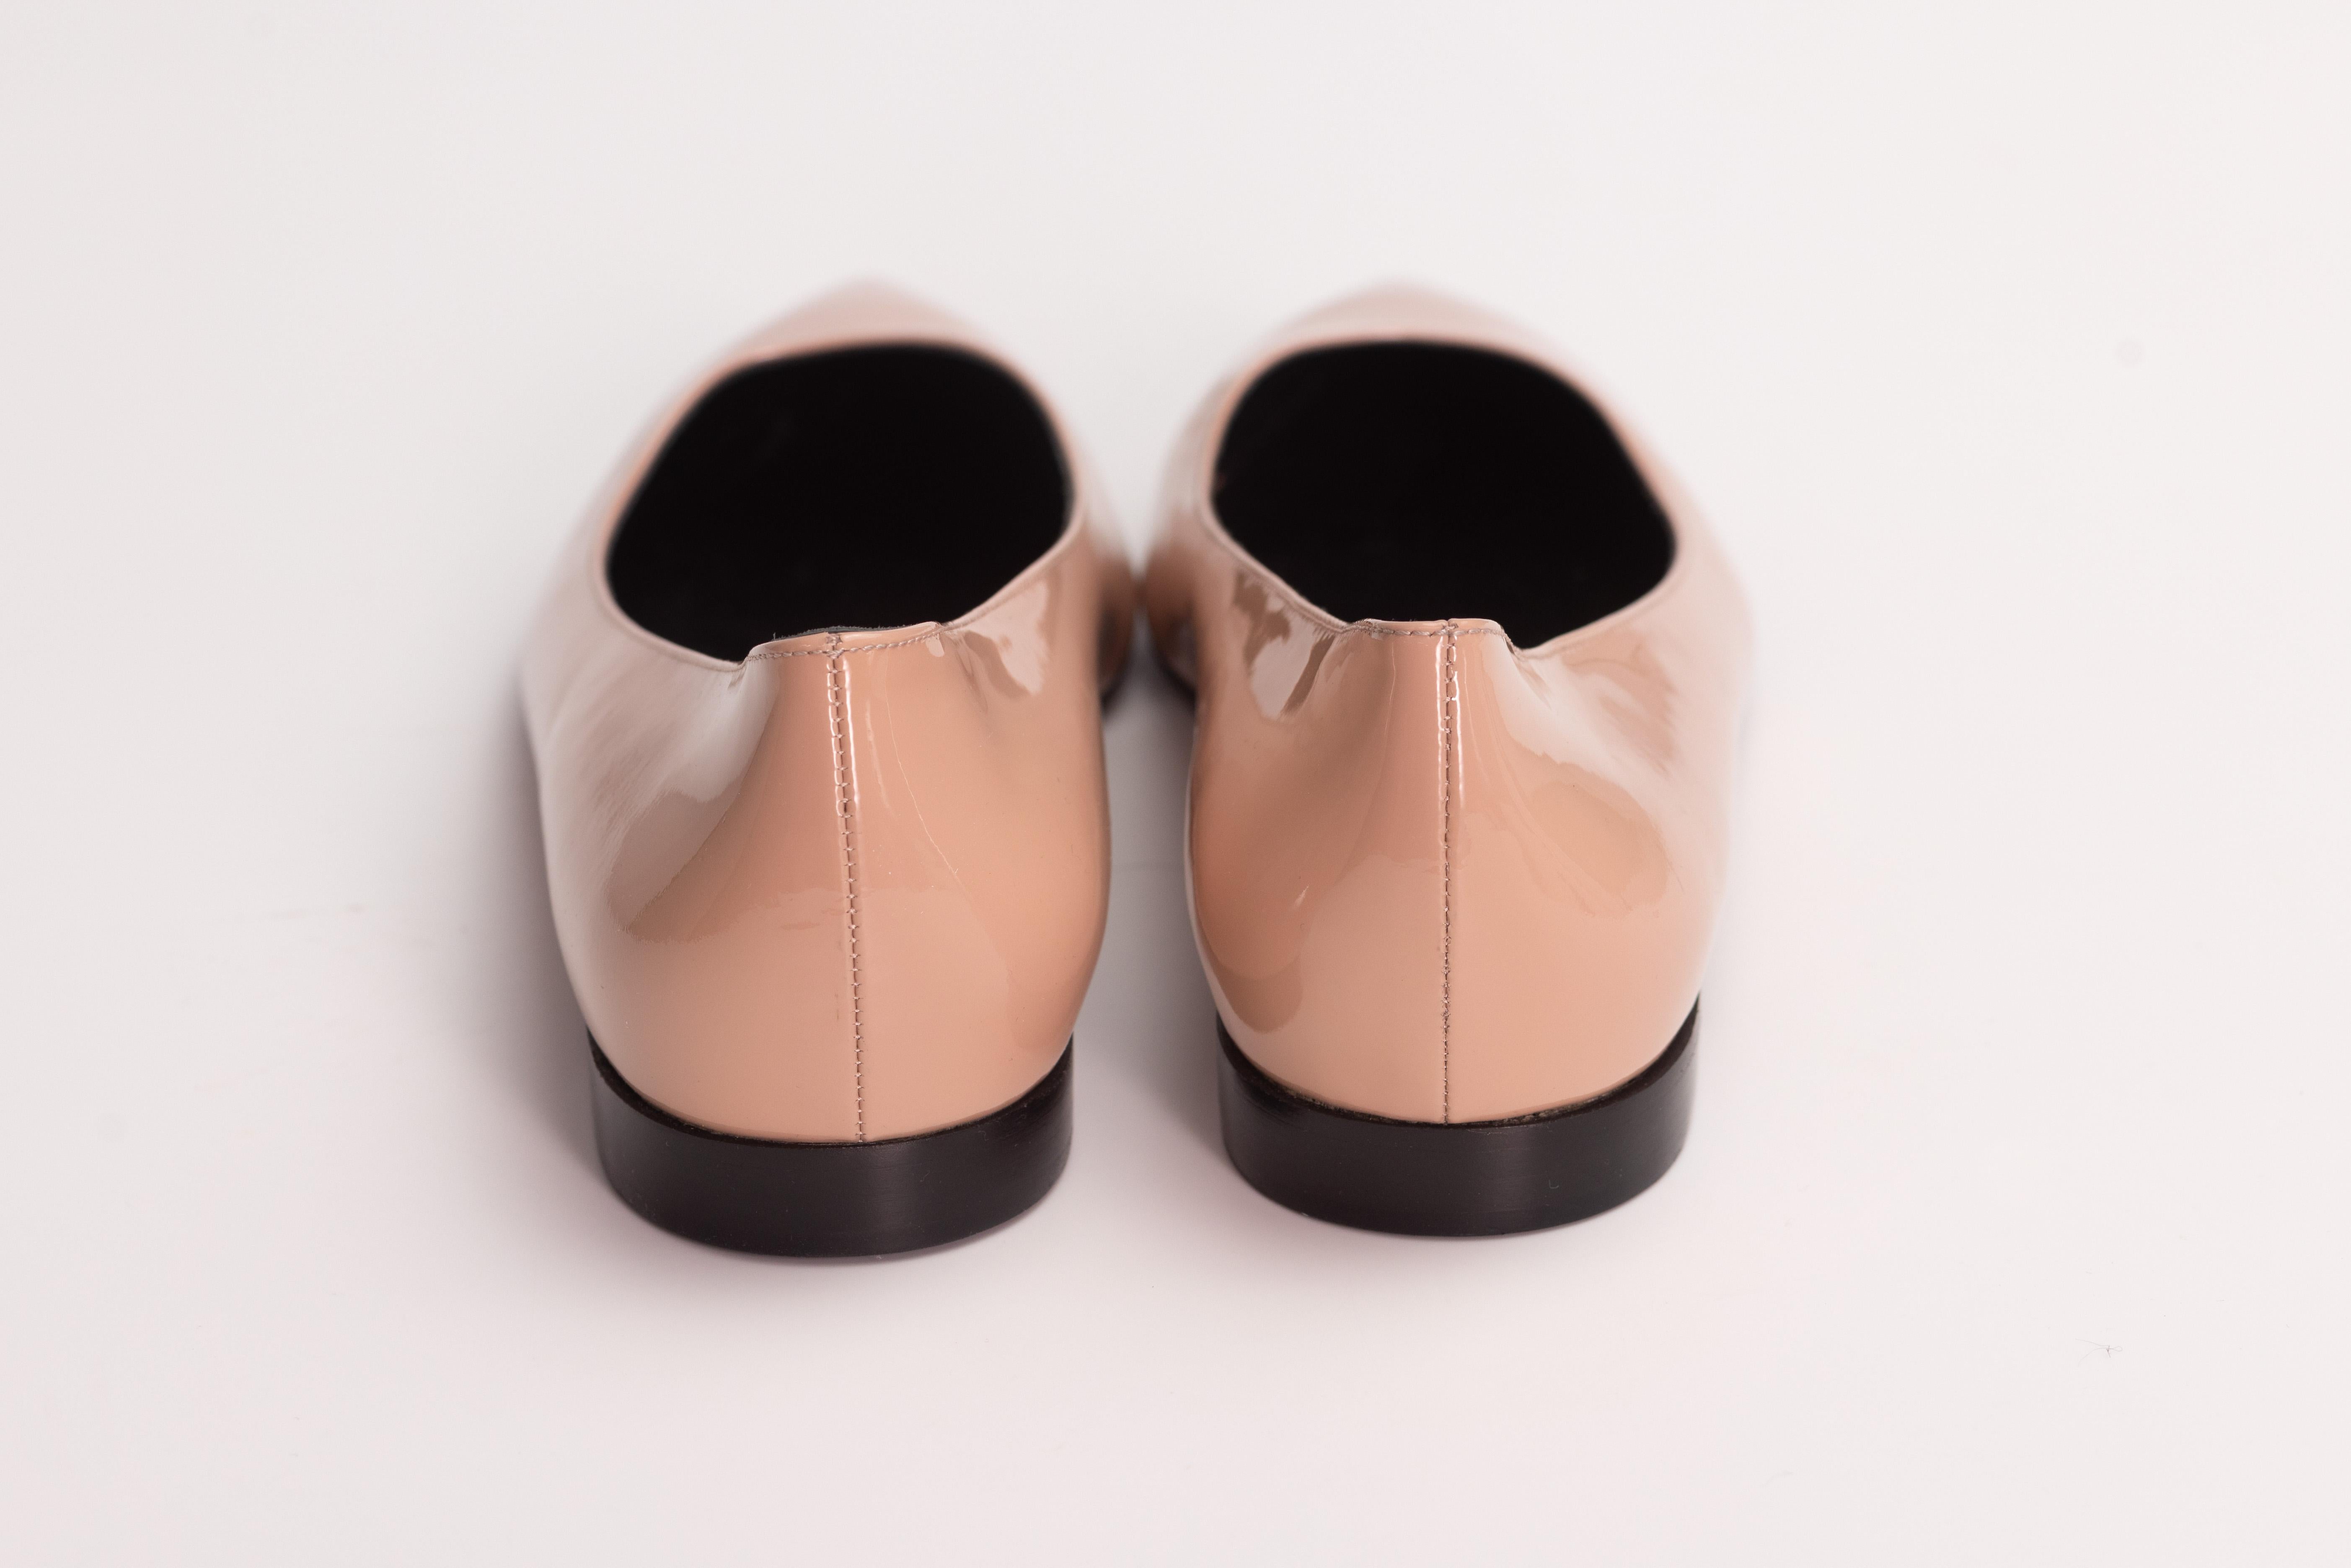 Saint Laurent Nude Pattent Flats (EU 41) In Good Condition For Sale In Montreal, Quebec